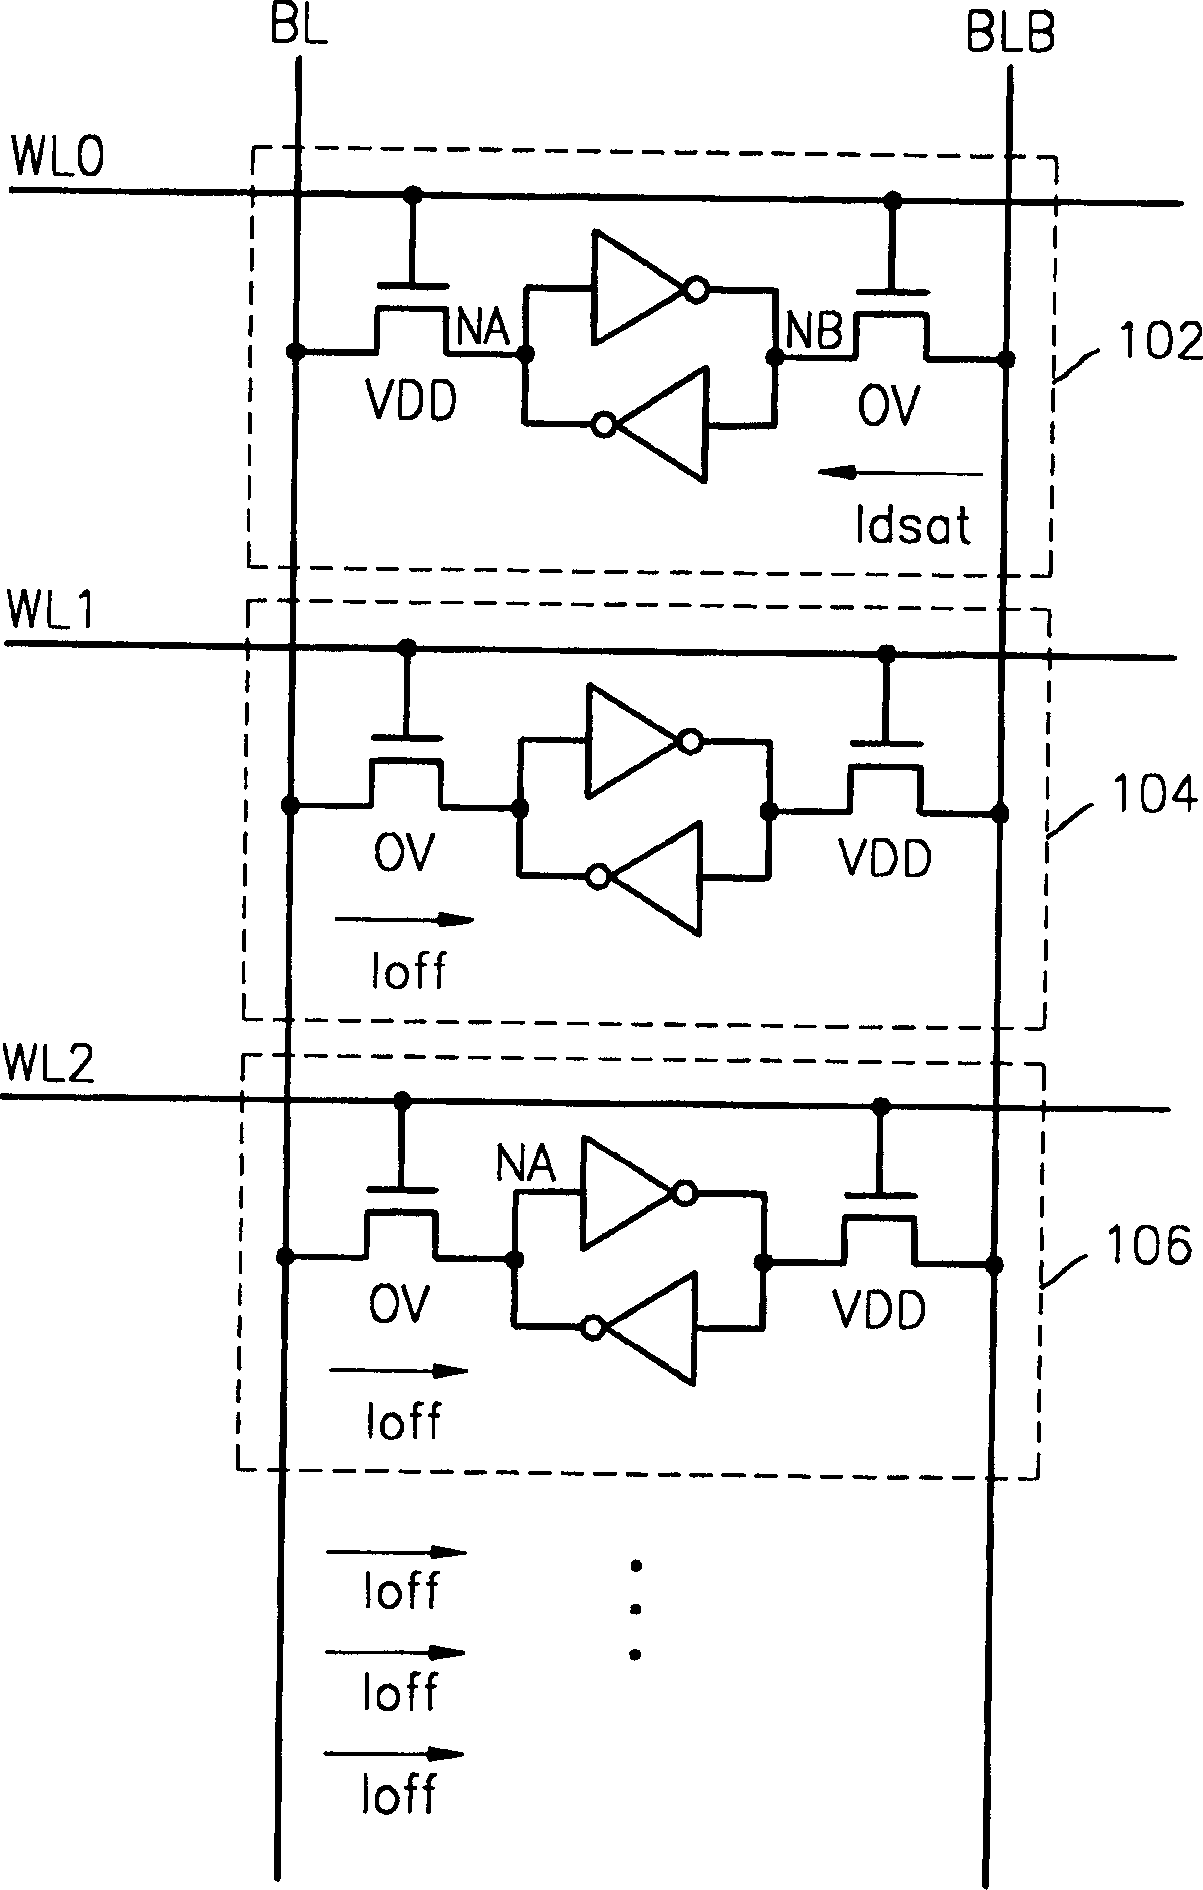 Memory devices having bit line precharge circuits and associated bit line precharge methods